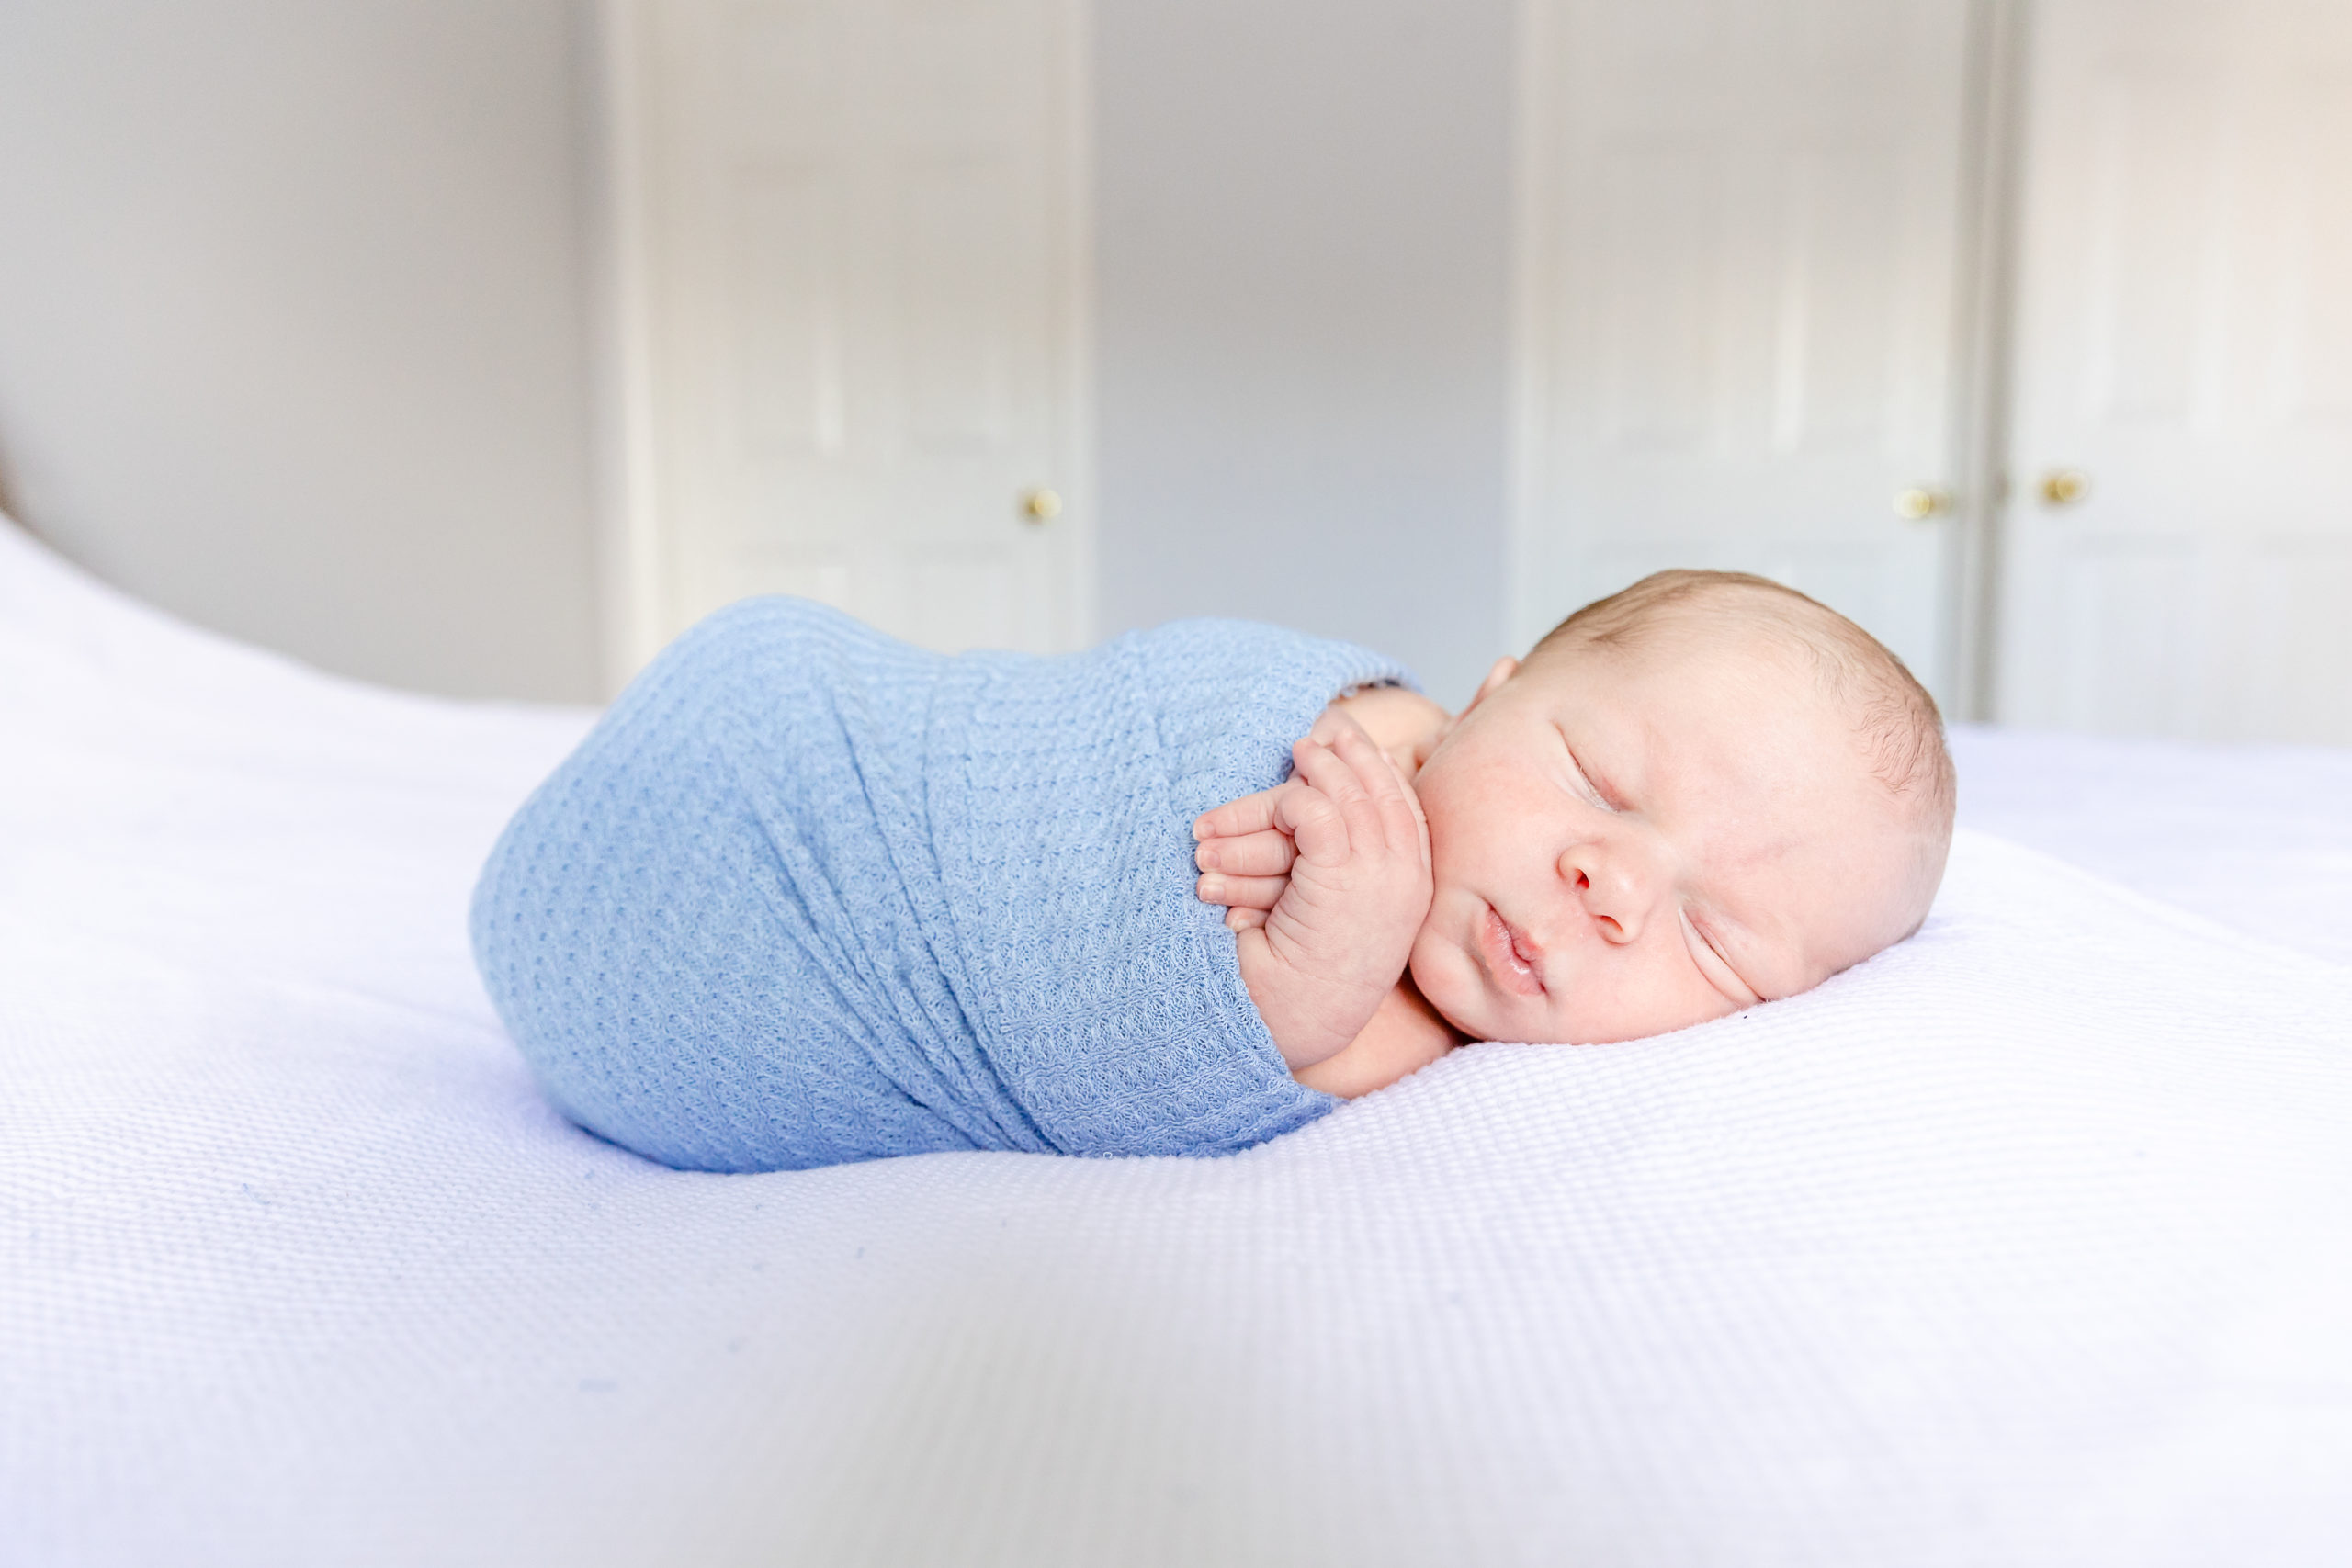 Lifestyle Newborn Session with a baby wrapped in blue blanket.